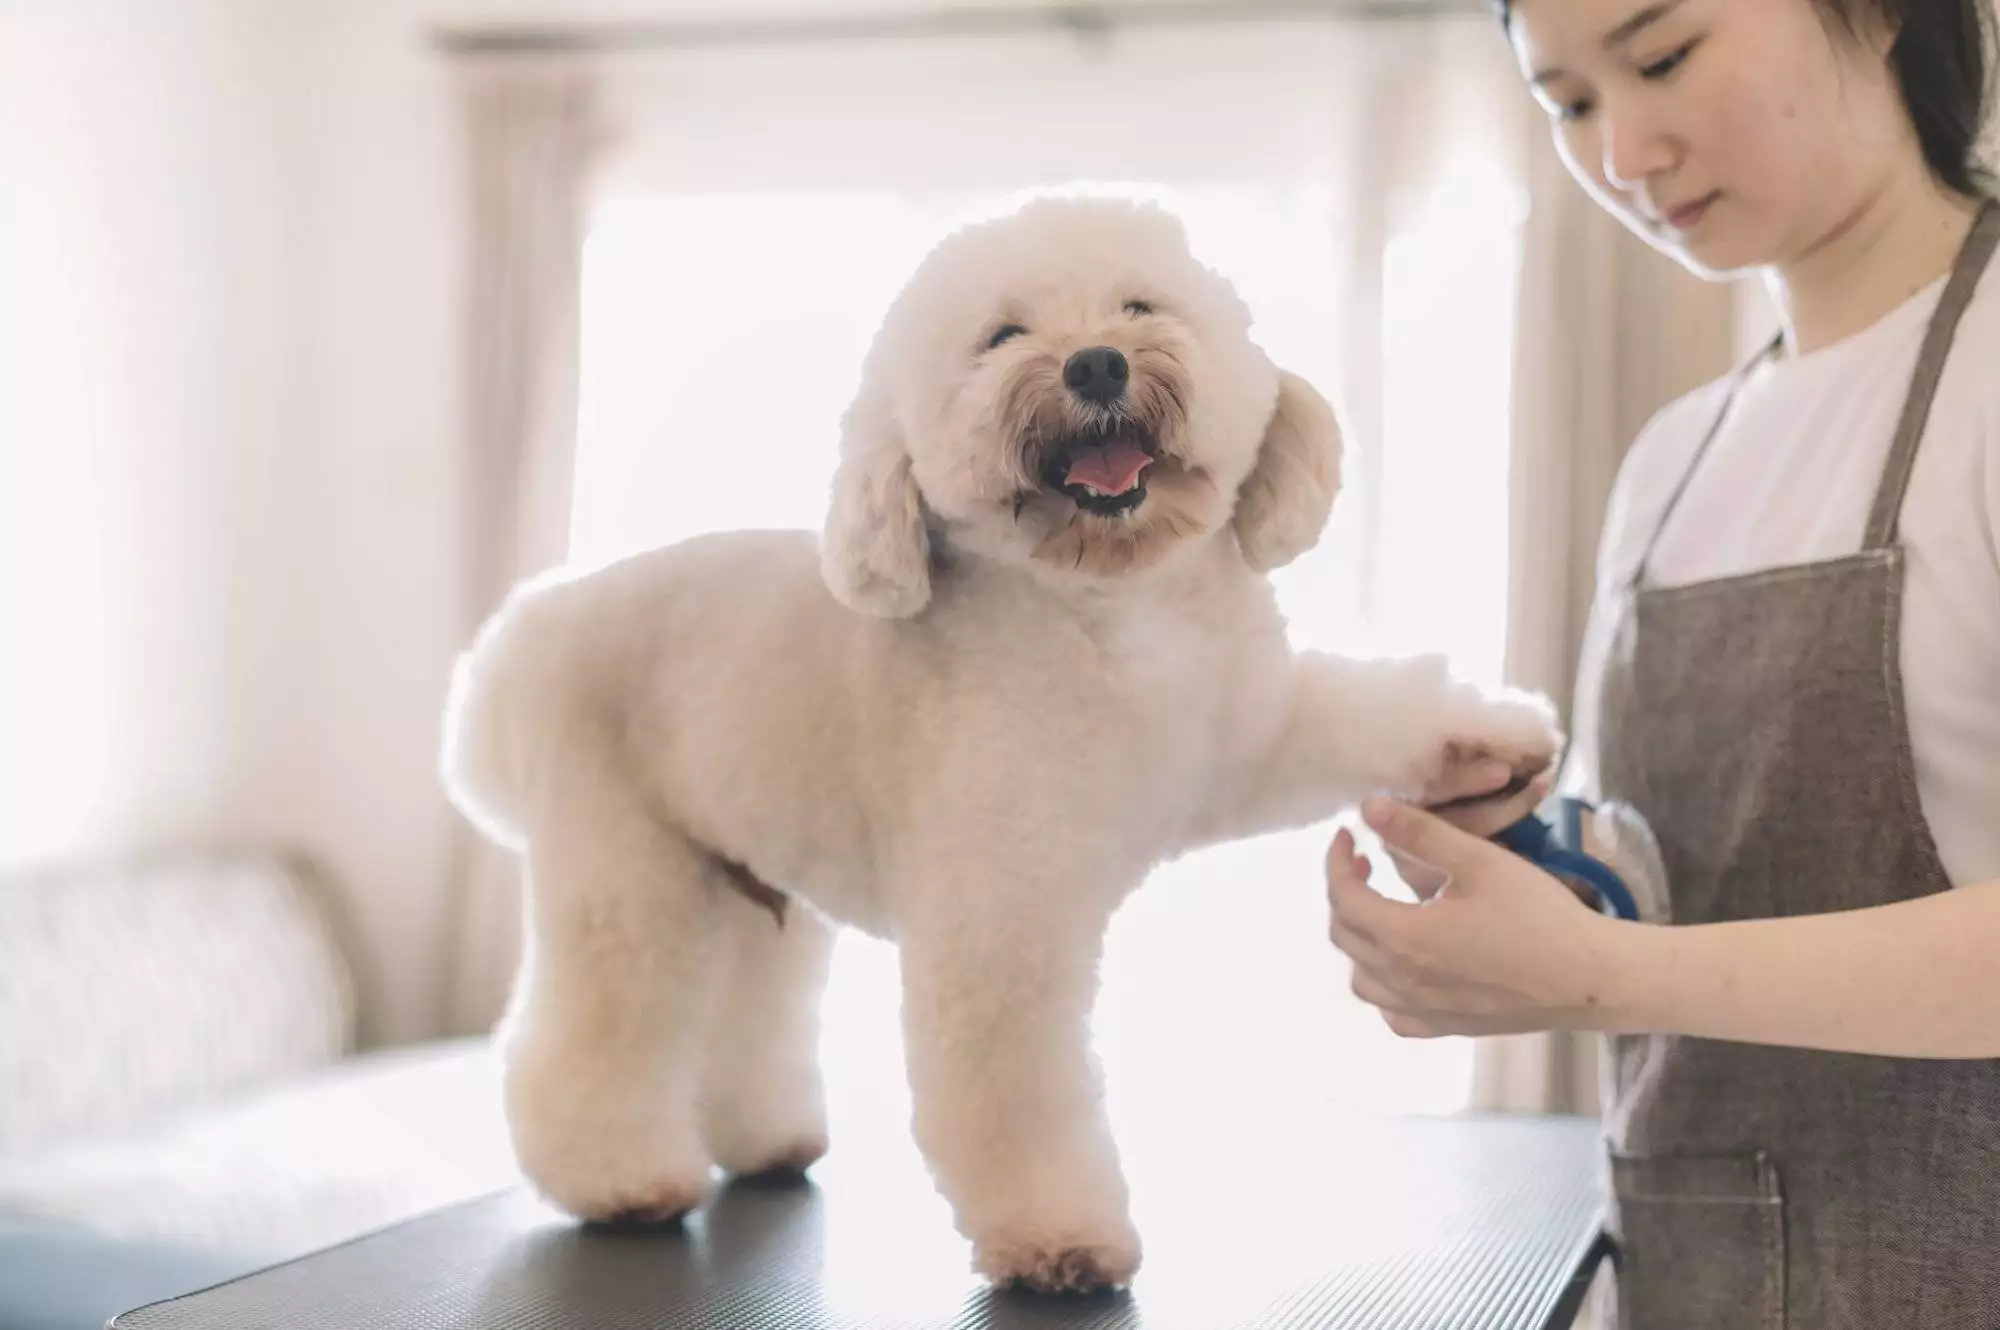 Pamper Your Pooch at Woof Gang Dog Grooming in Friendswood